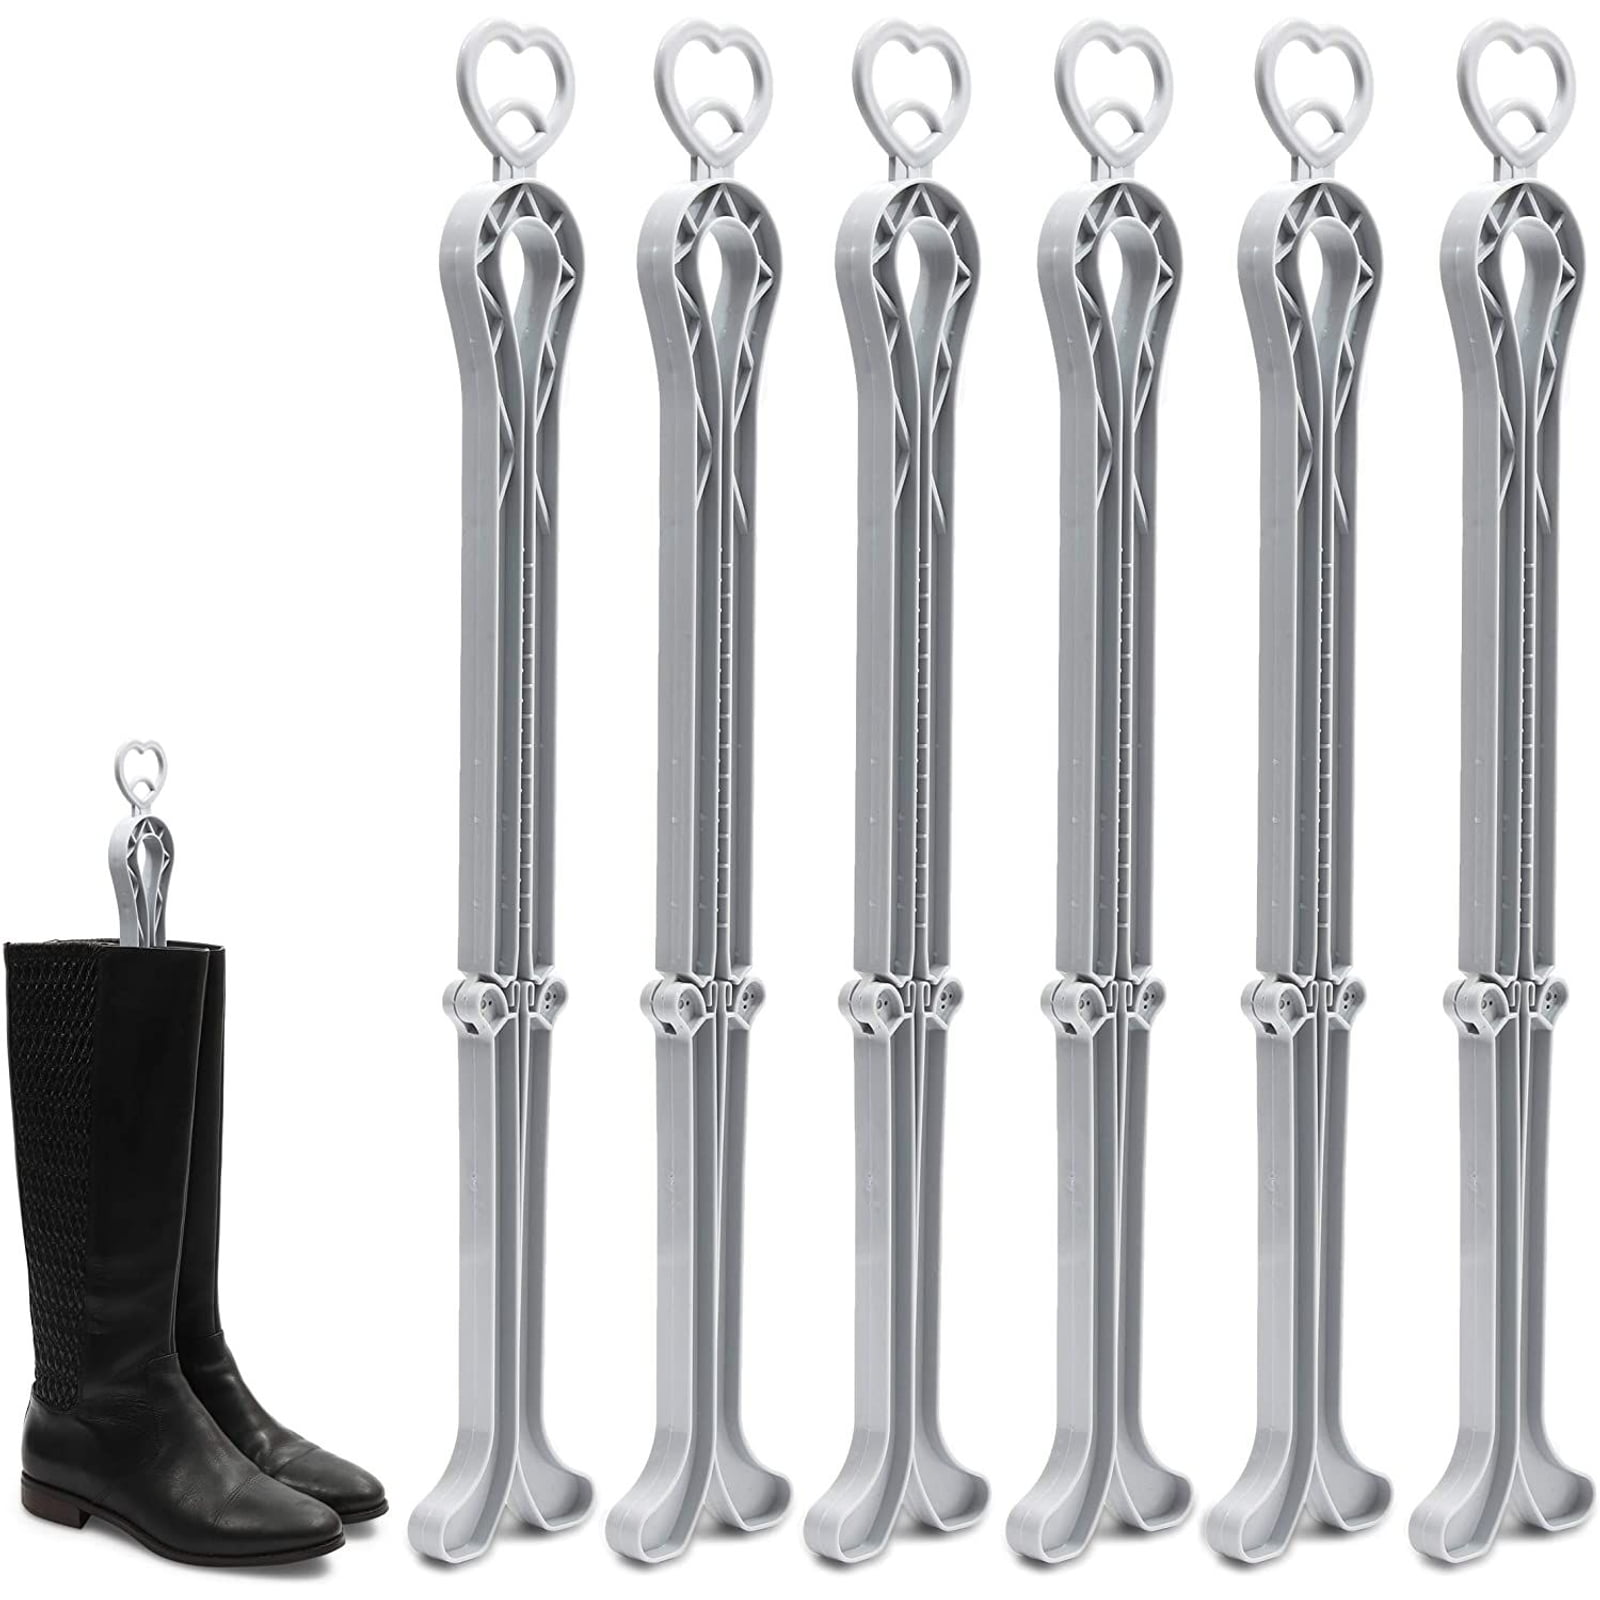 Safer Contouring Adjustable Height No Trimming 10 piece Foam Boot Shapers No Sharp Edges Crease Free Tall Tree Shapers Closet Display Shoe Rack Organizer Dorm Knee High Cowboy Cowgirl Boots Horse 